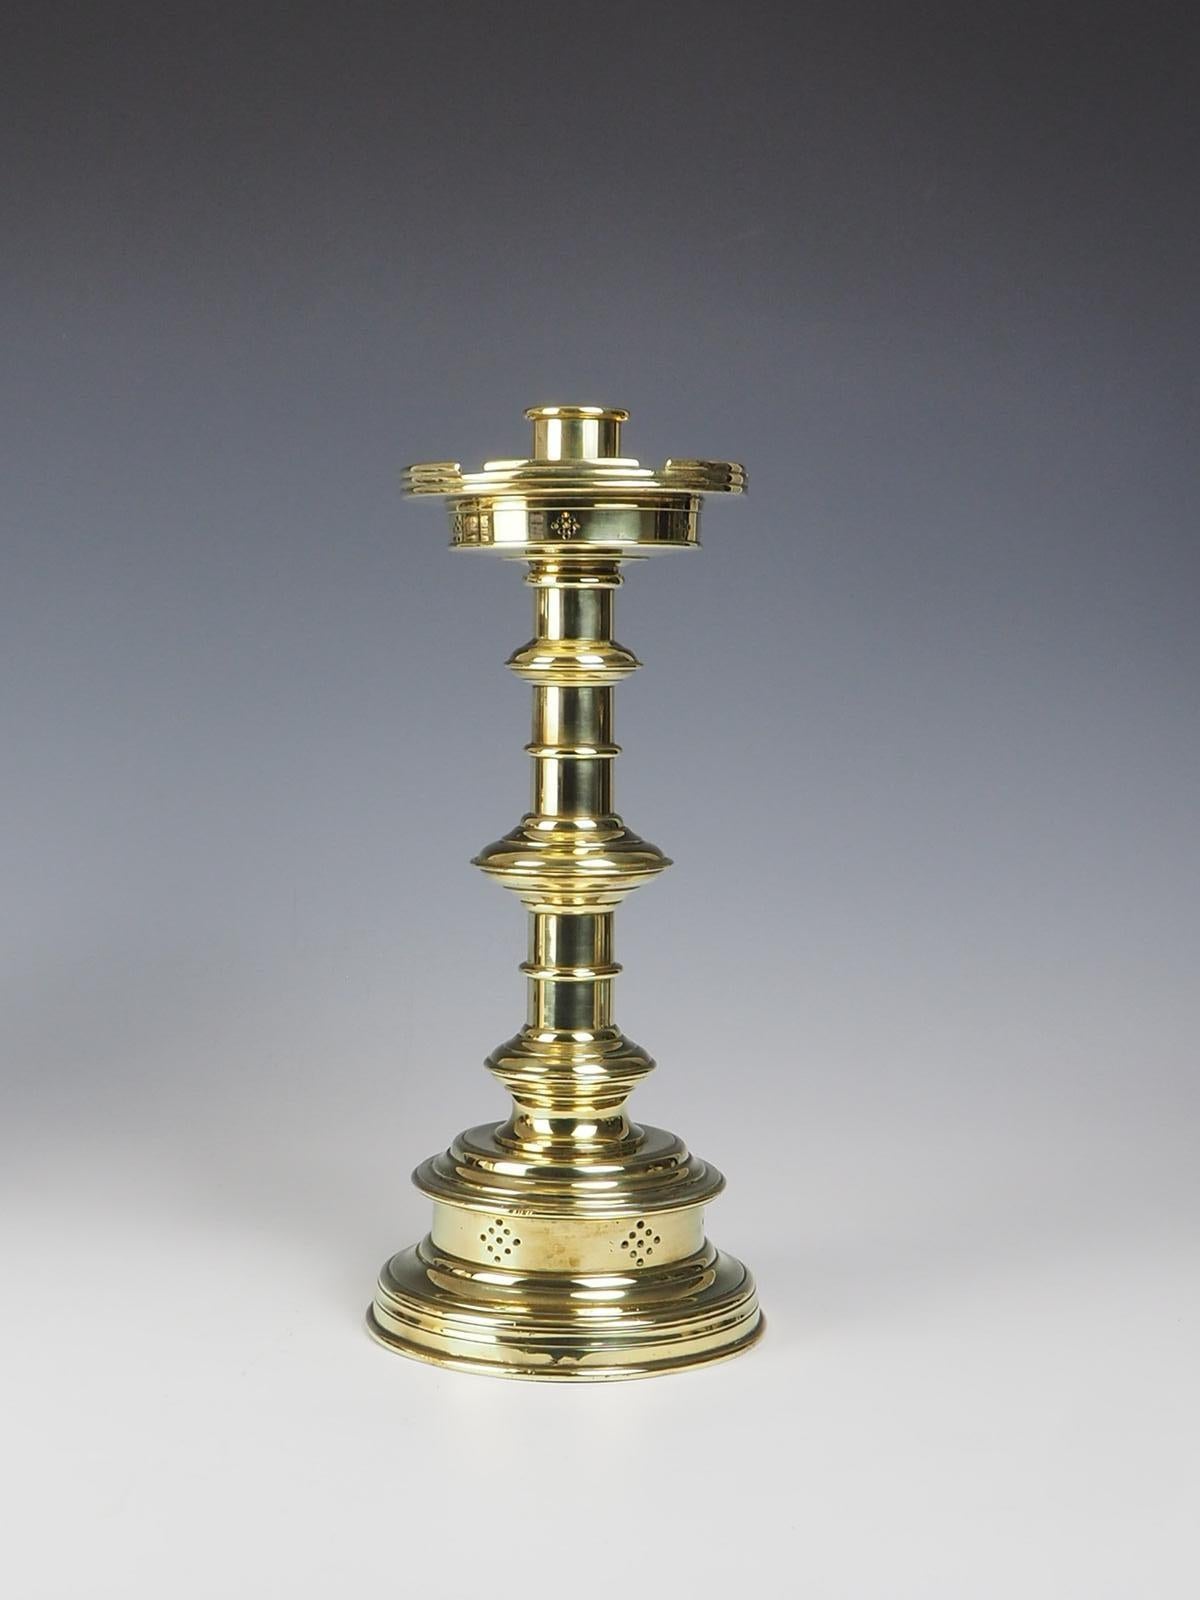 English 19th Century Pierced Brass Castellated Candle Holder, a stunning piece that exudes elegance and charm. Crafted during the 19th century, this candle holder showcases intricate pierced brass detailing, adding a touch of sophistication. The